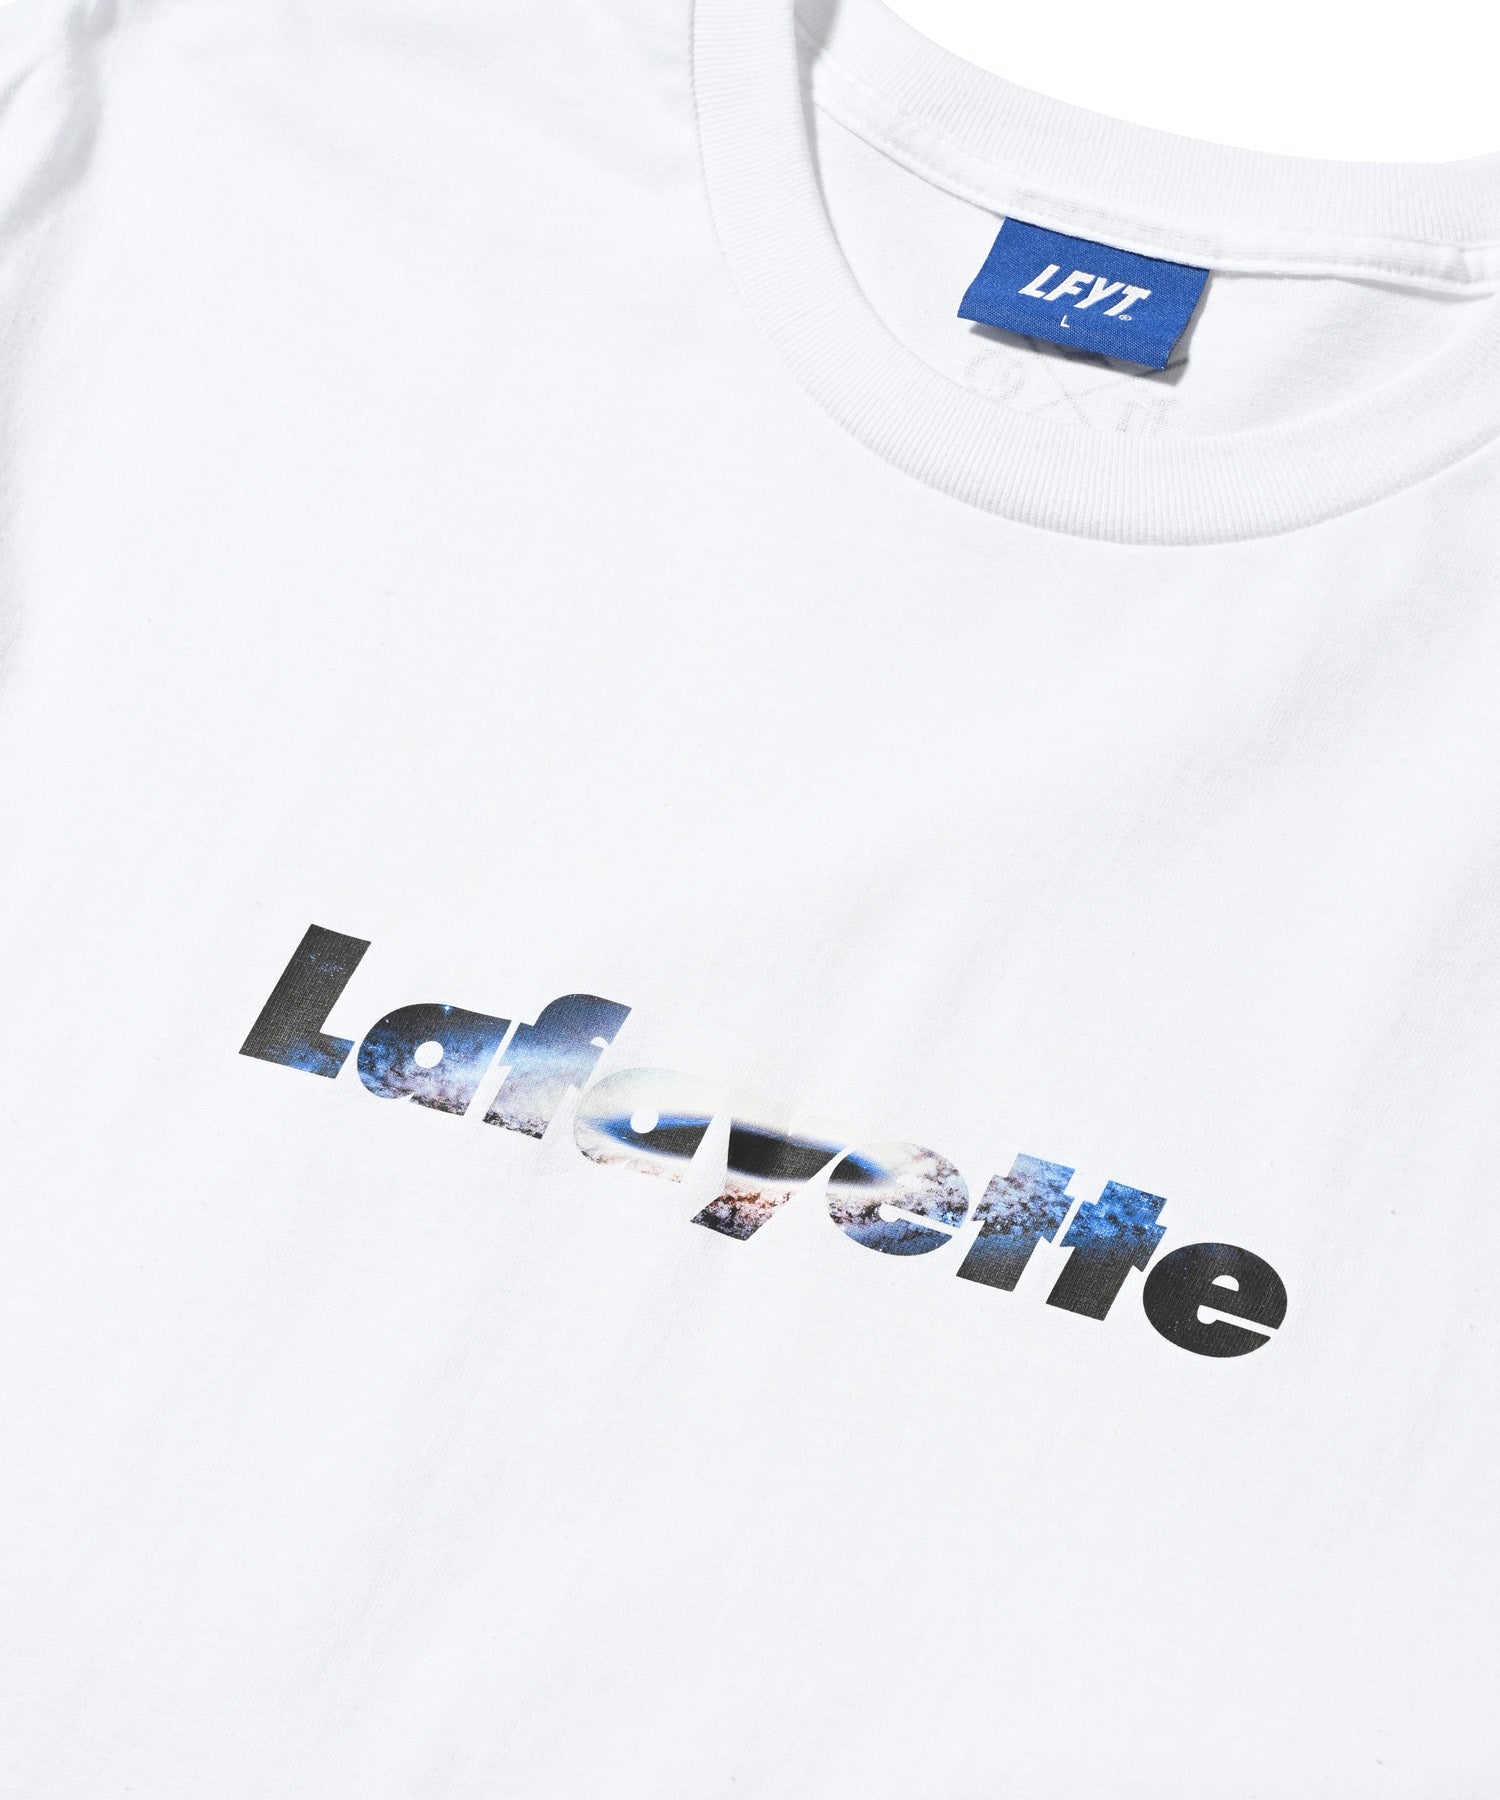 LFYT Core Logo Tee COLLAPSAR LE230126 LFHQ-15